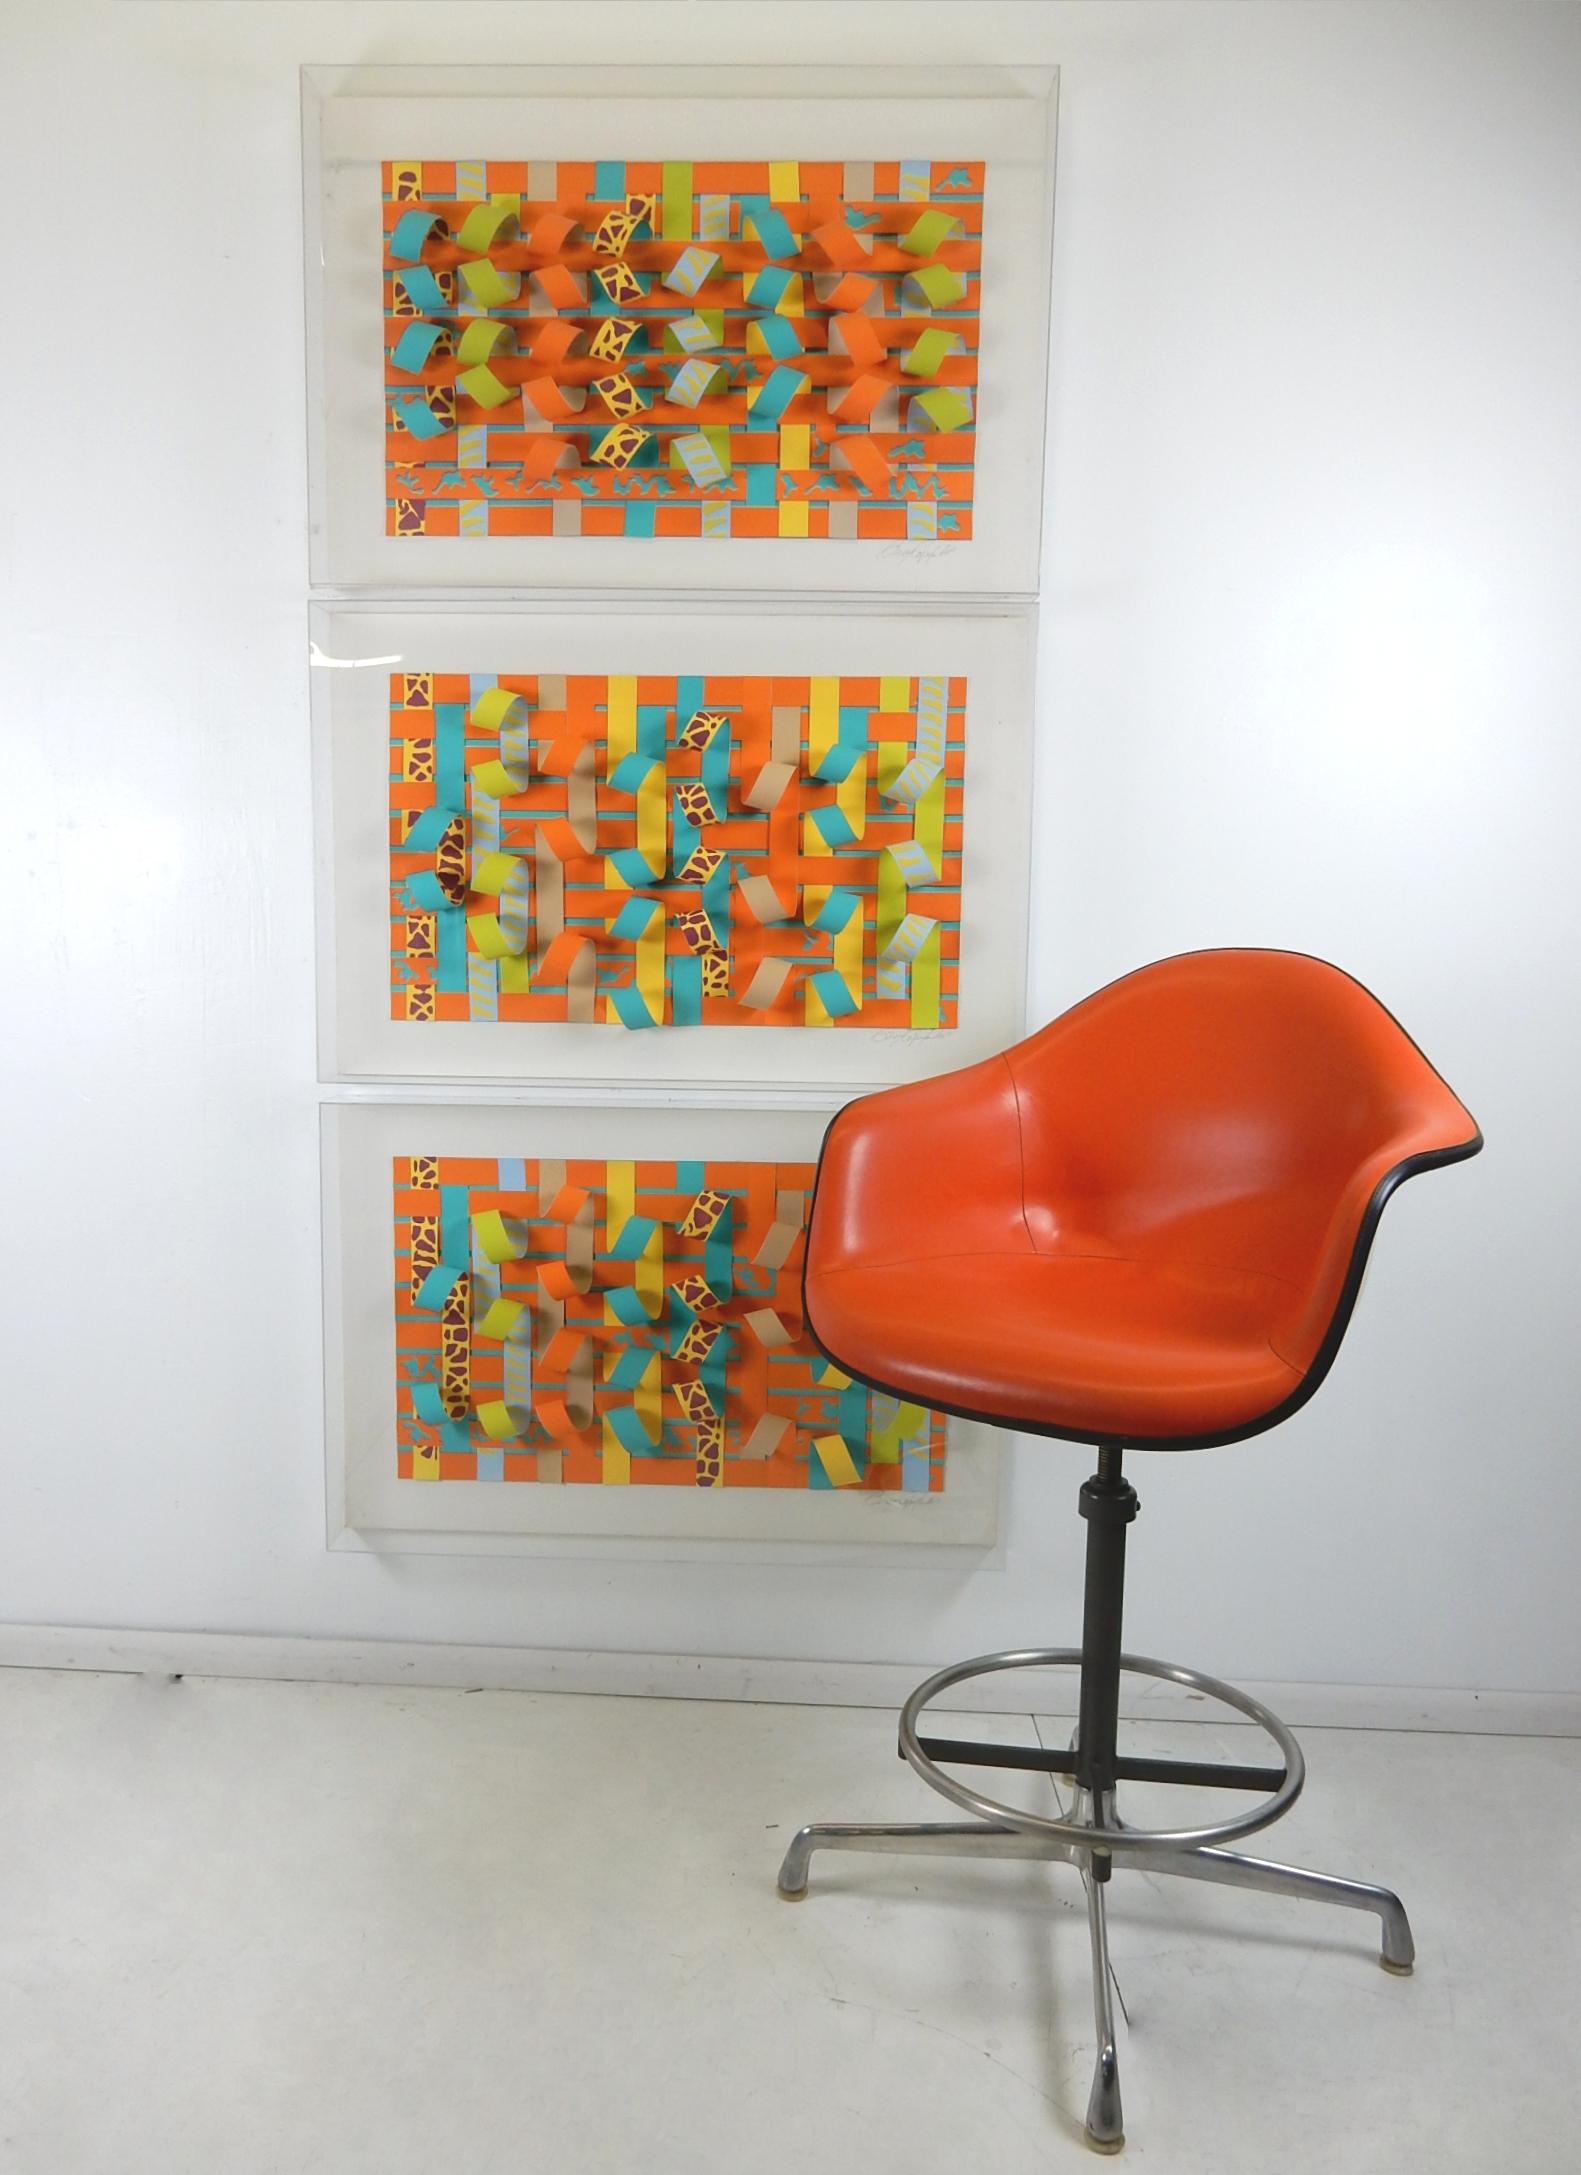 Sofa size Popart paper sculptures in acrylic shadowboxes by graphic artist Greg Copeland.
Brightly colored paper strips looped and woven together and encased in large acrylic boxes.
Each is sighed/dated in pencil by Greg.
Can be hung side by